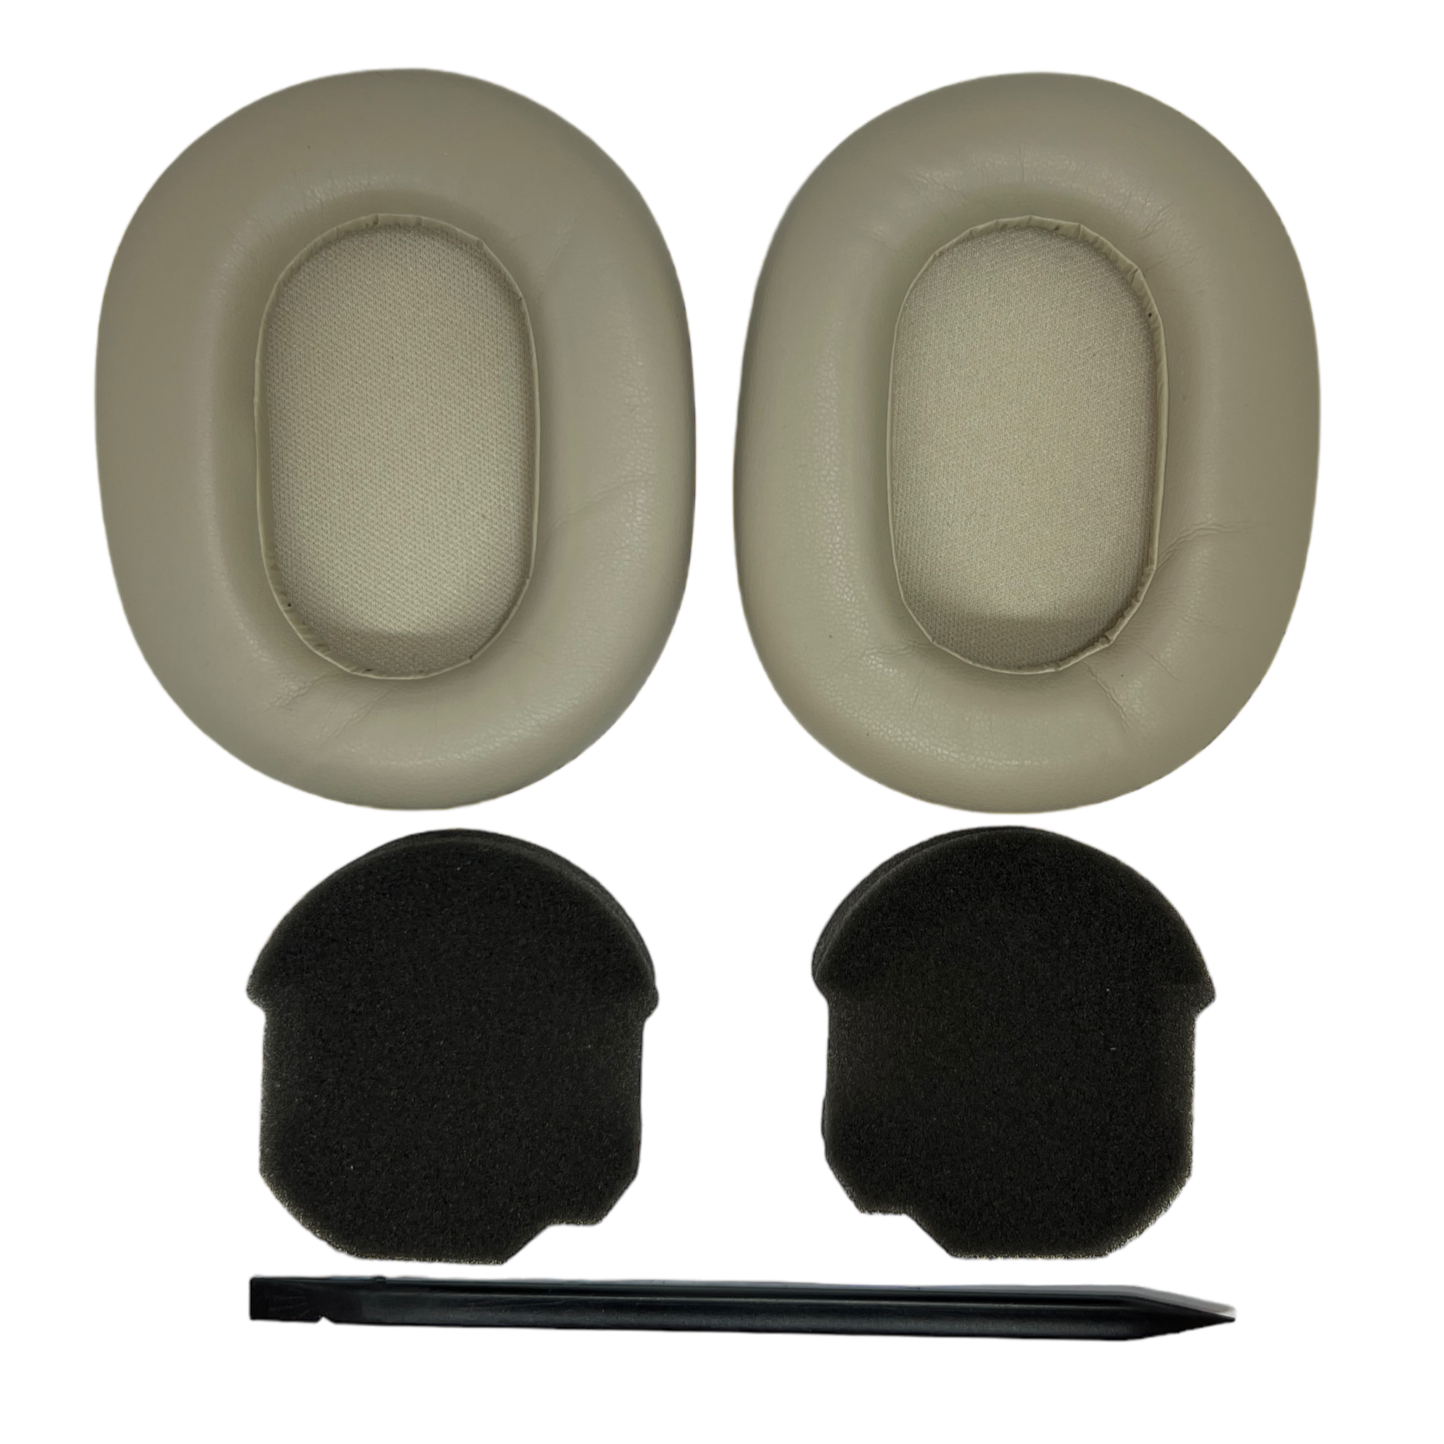 CS Replacement Ear Pad Cushions for Sony WH-1000XM5 WH1000XM5 XM5 Headphones - CentralSound